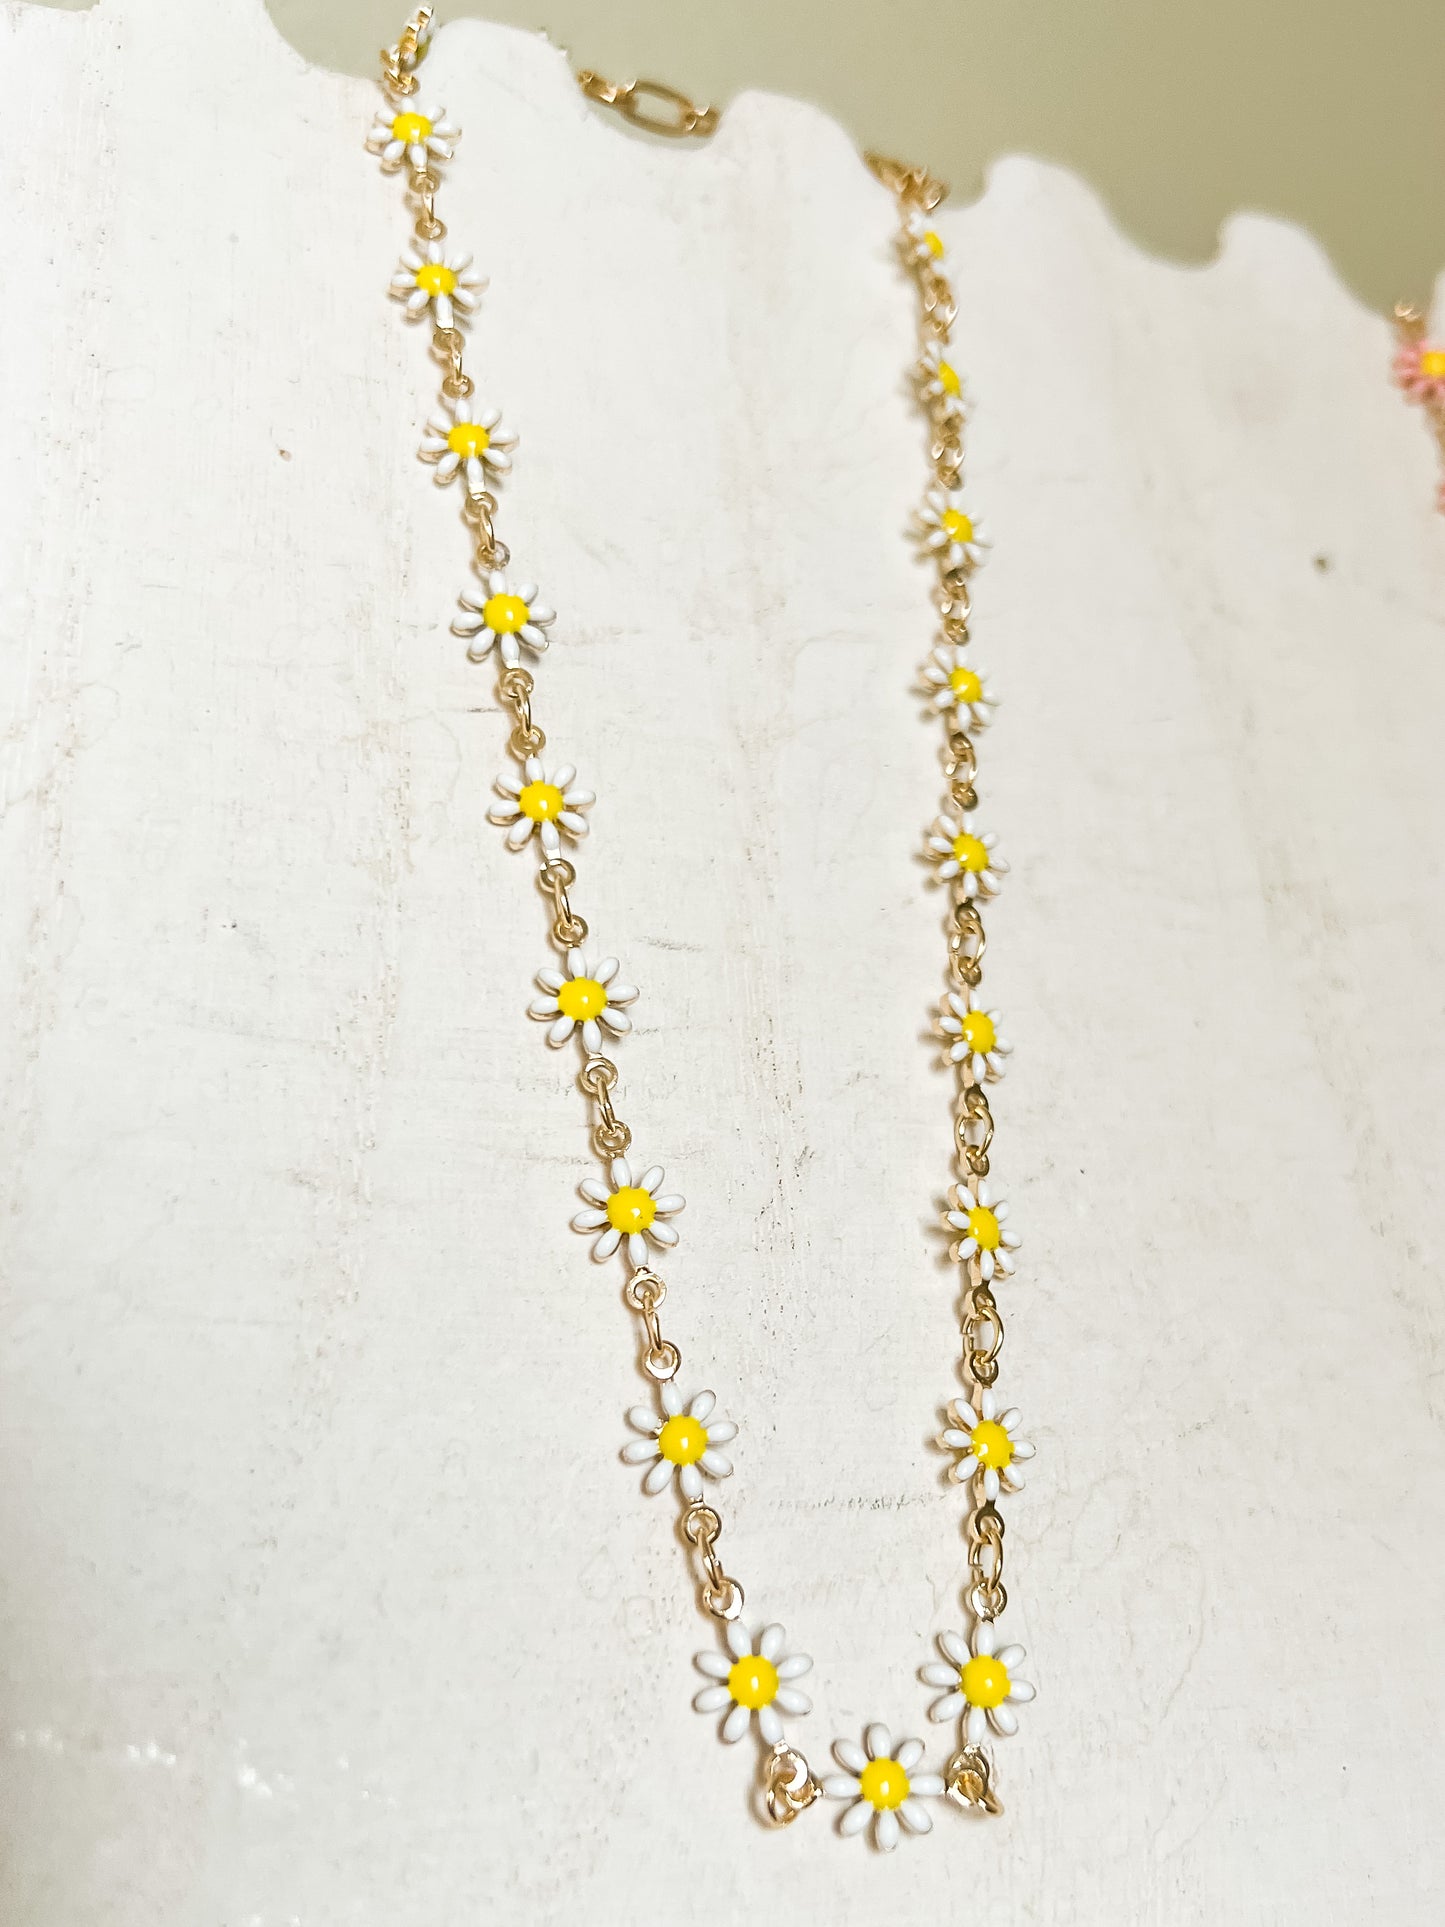 Daisies on the mind necklace